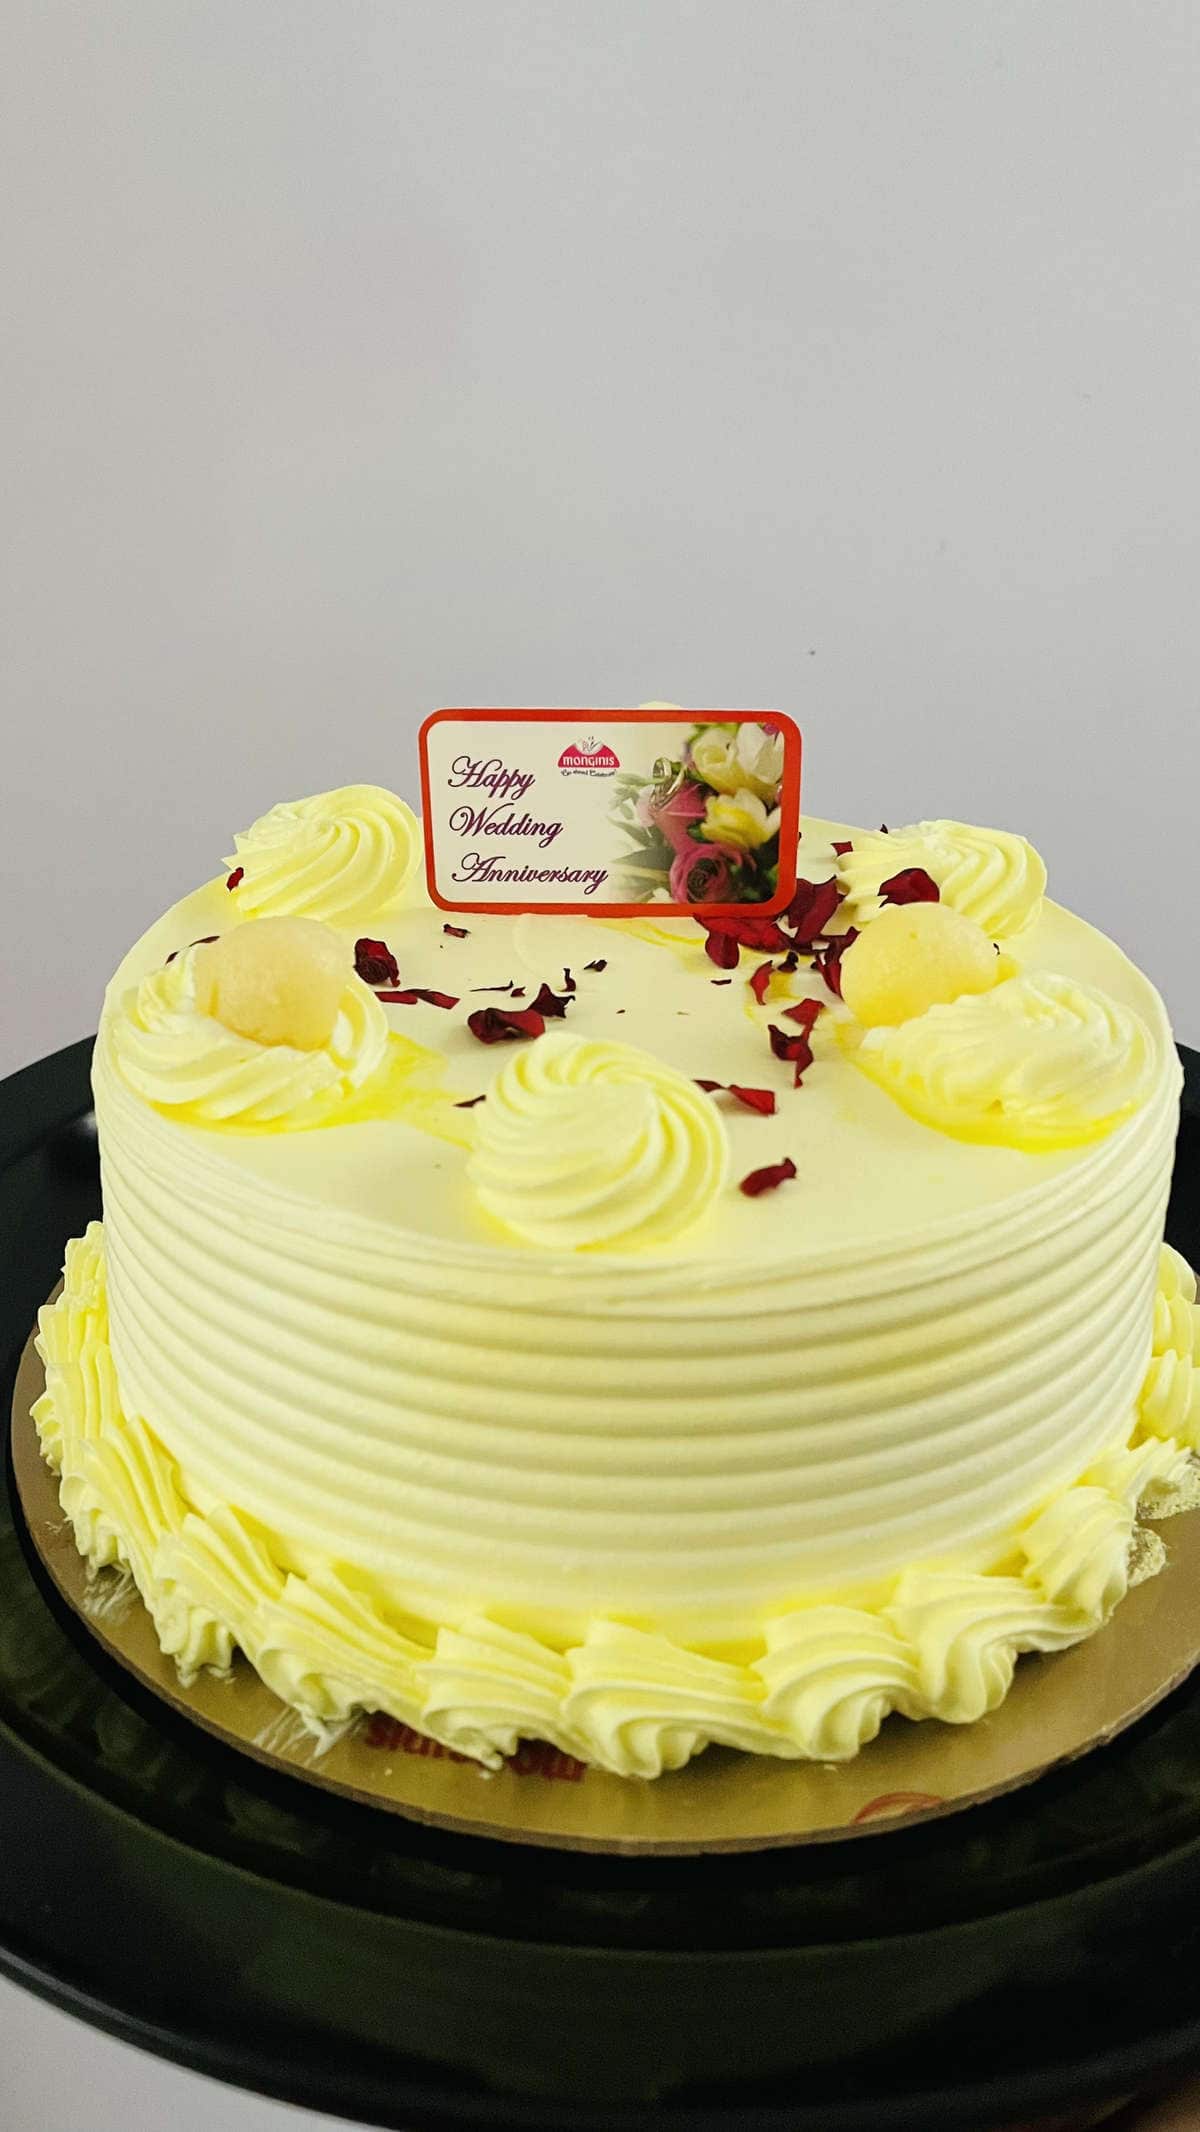 Monginis Cake Shop | Titozz - Most Trusted online food delivery service in  Diva , Palava , Badlapur and Taloja